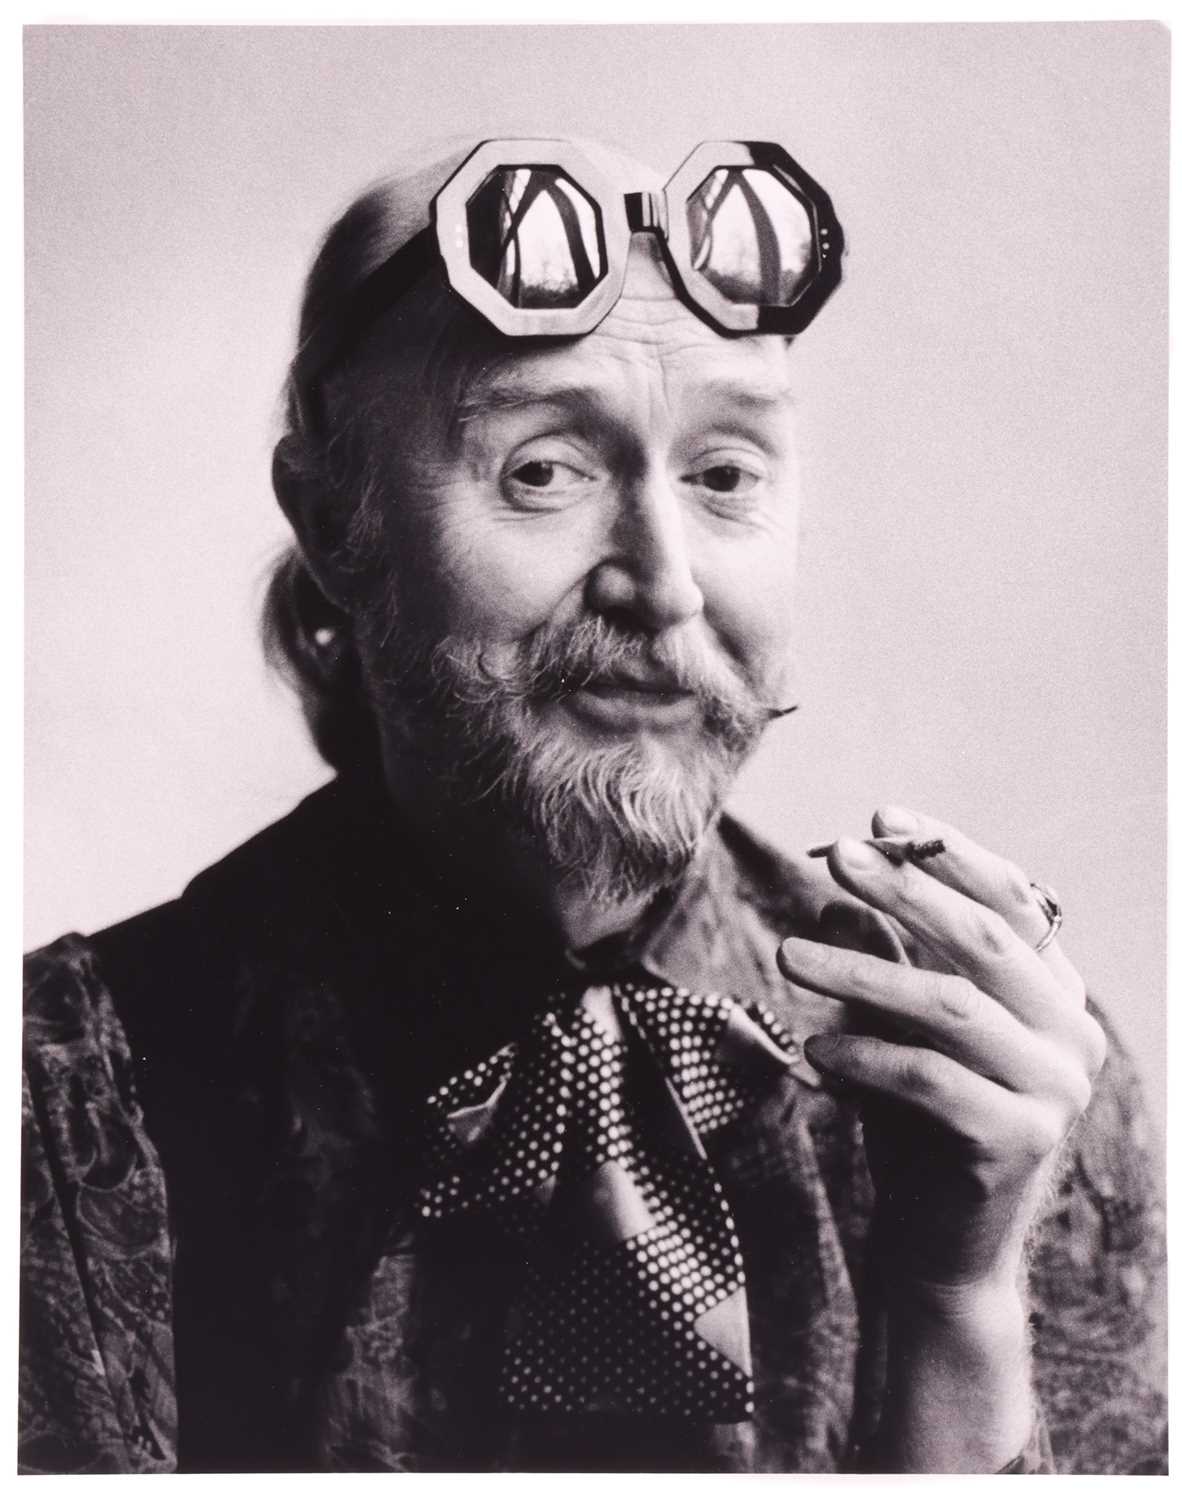 From the personal collection of Vivian Stanshall, founding member of the Bonzo Dog Doo-Dah Band, a p - Image 6 of 8